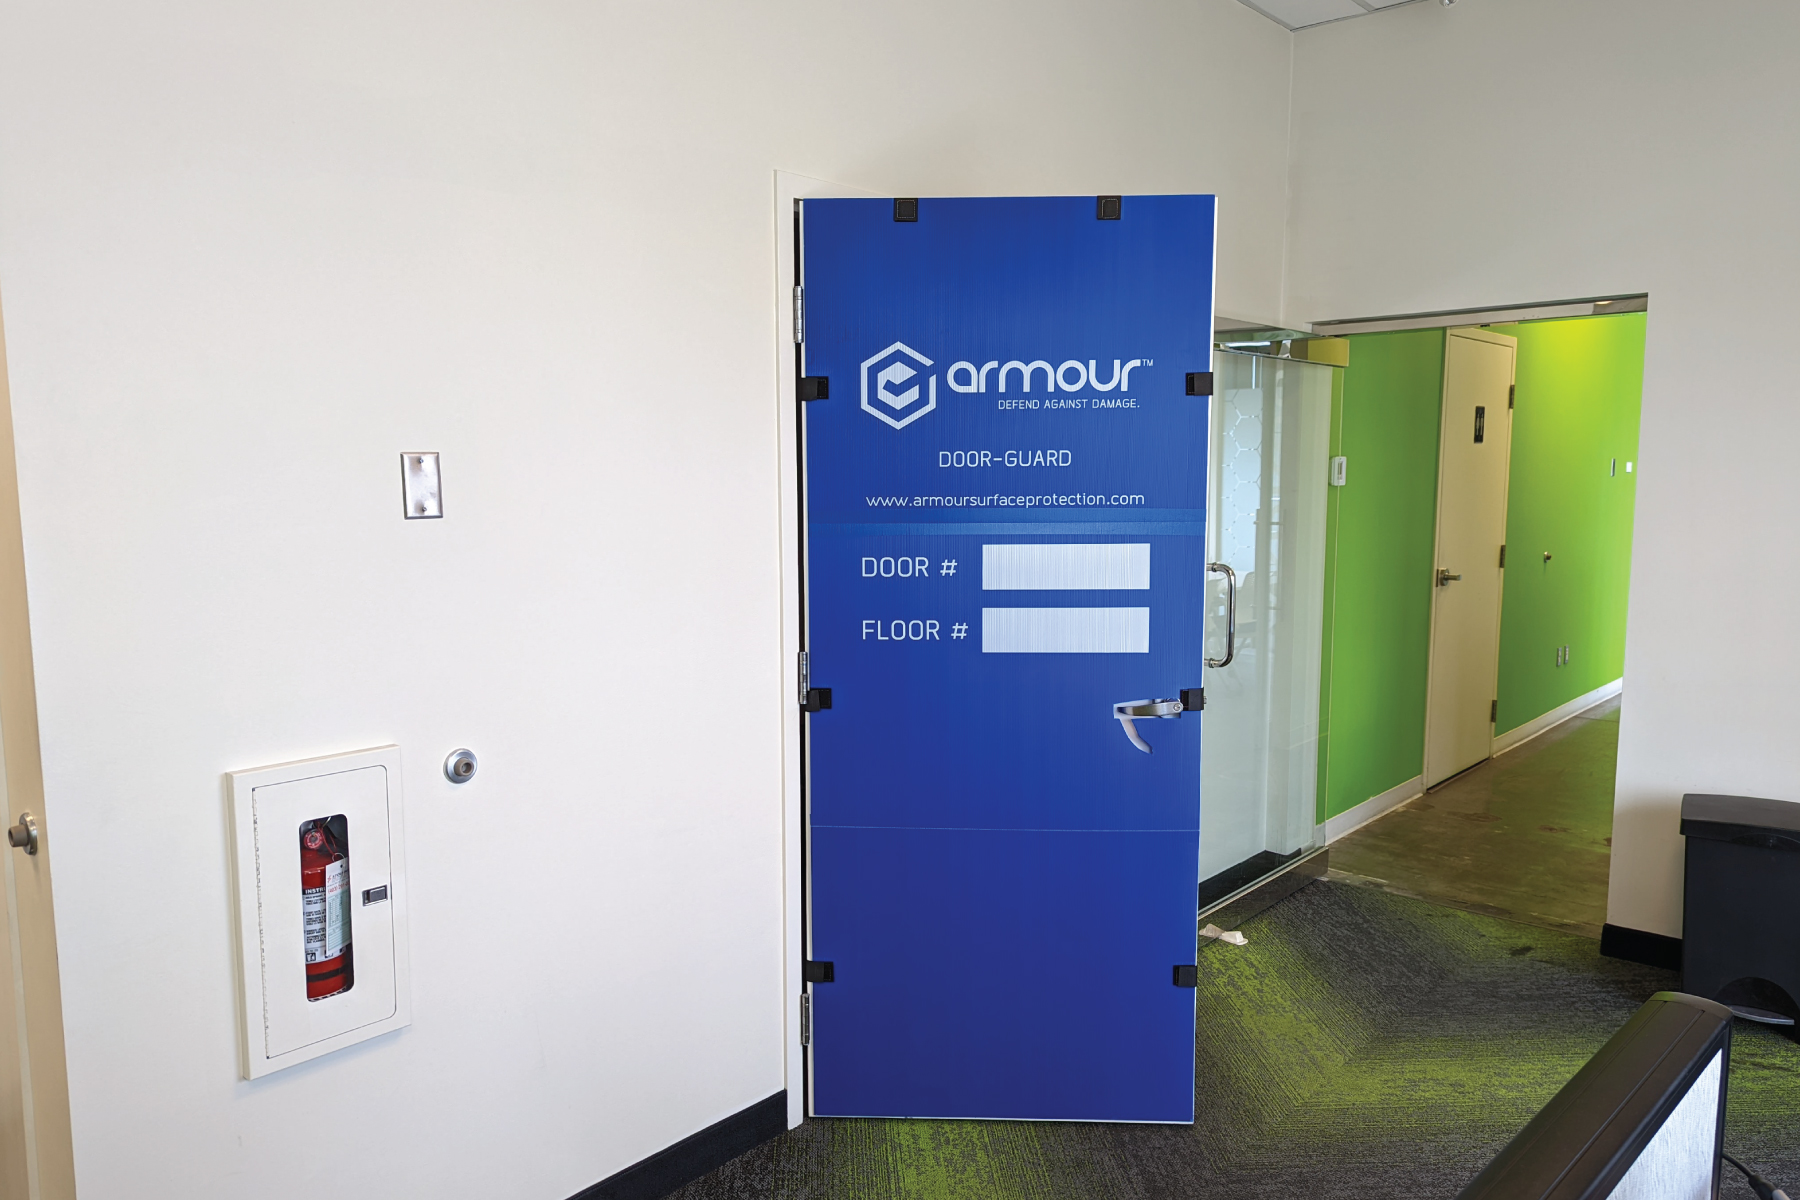 Image of Armour Door-Guard for temporary door protection blog by Axiom Surface Protection Canada/ North America